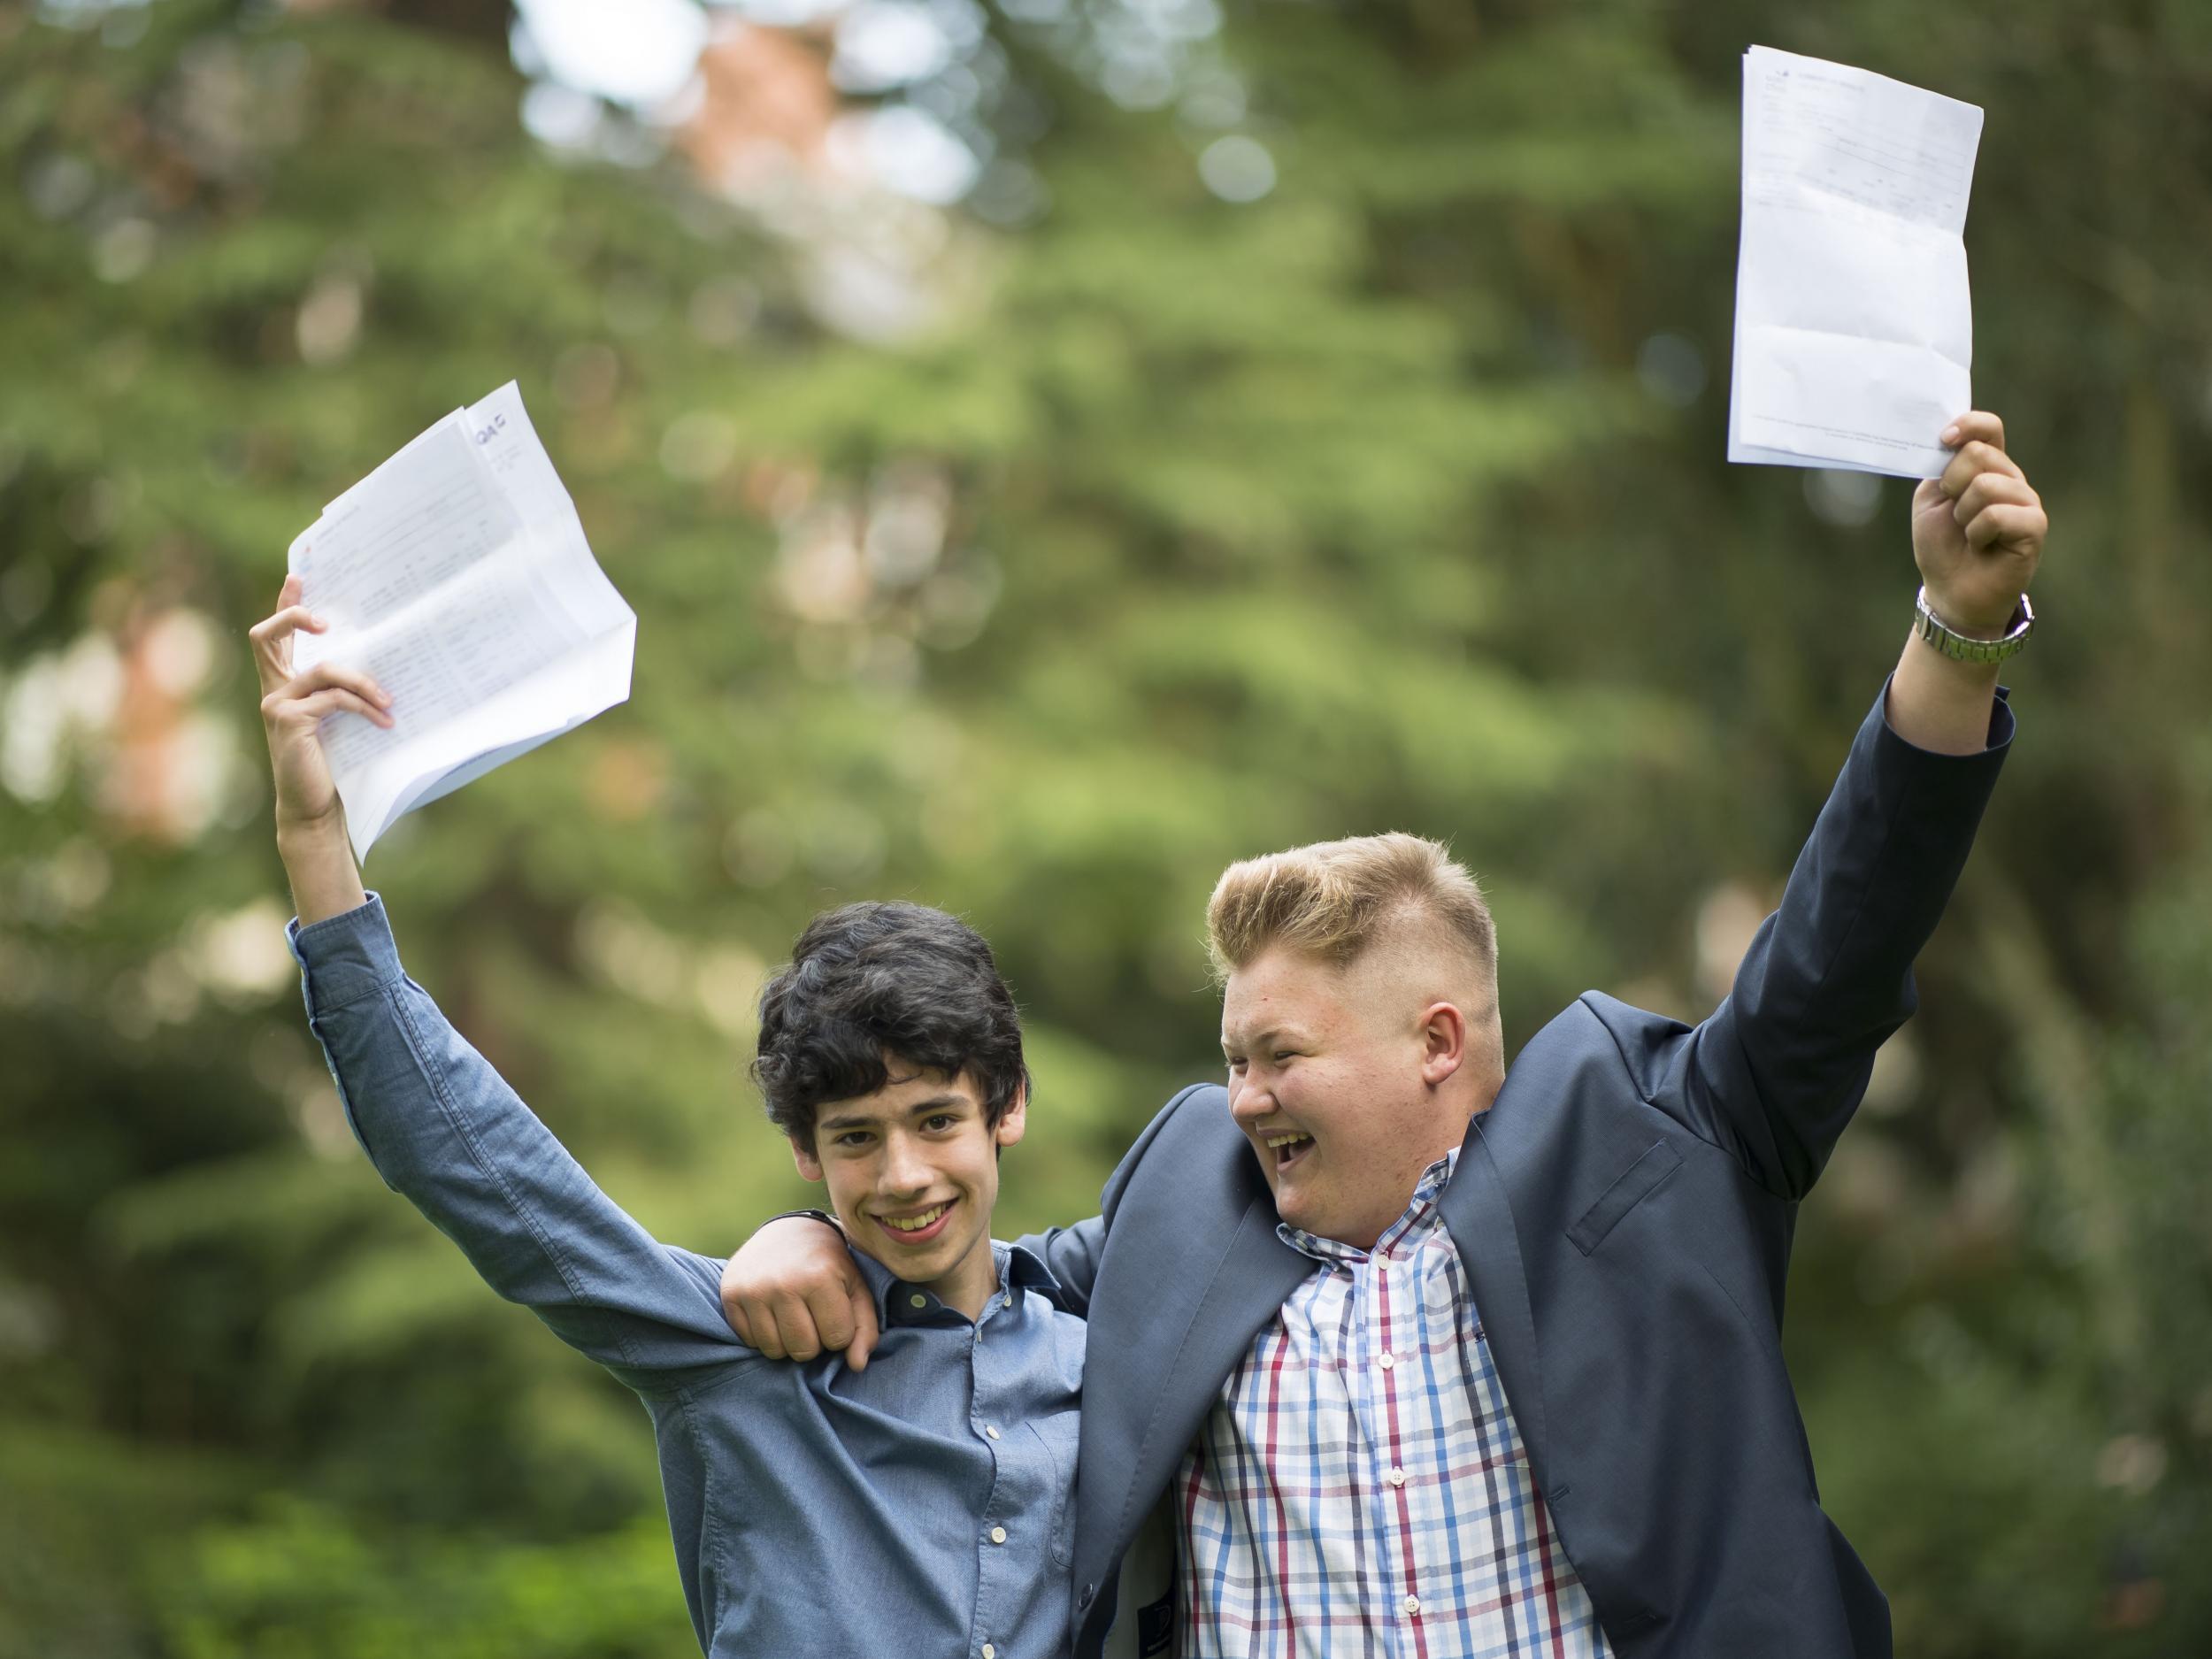 Matthew Lawrence (left) and Scott Jenkins celebrate after receiving their GCSE results at Ffynone House School in Swansea